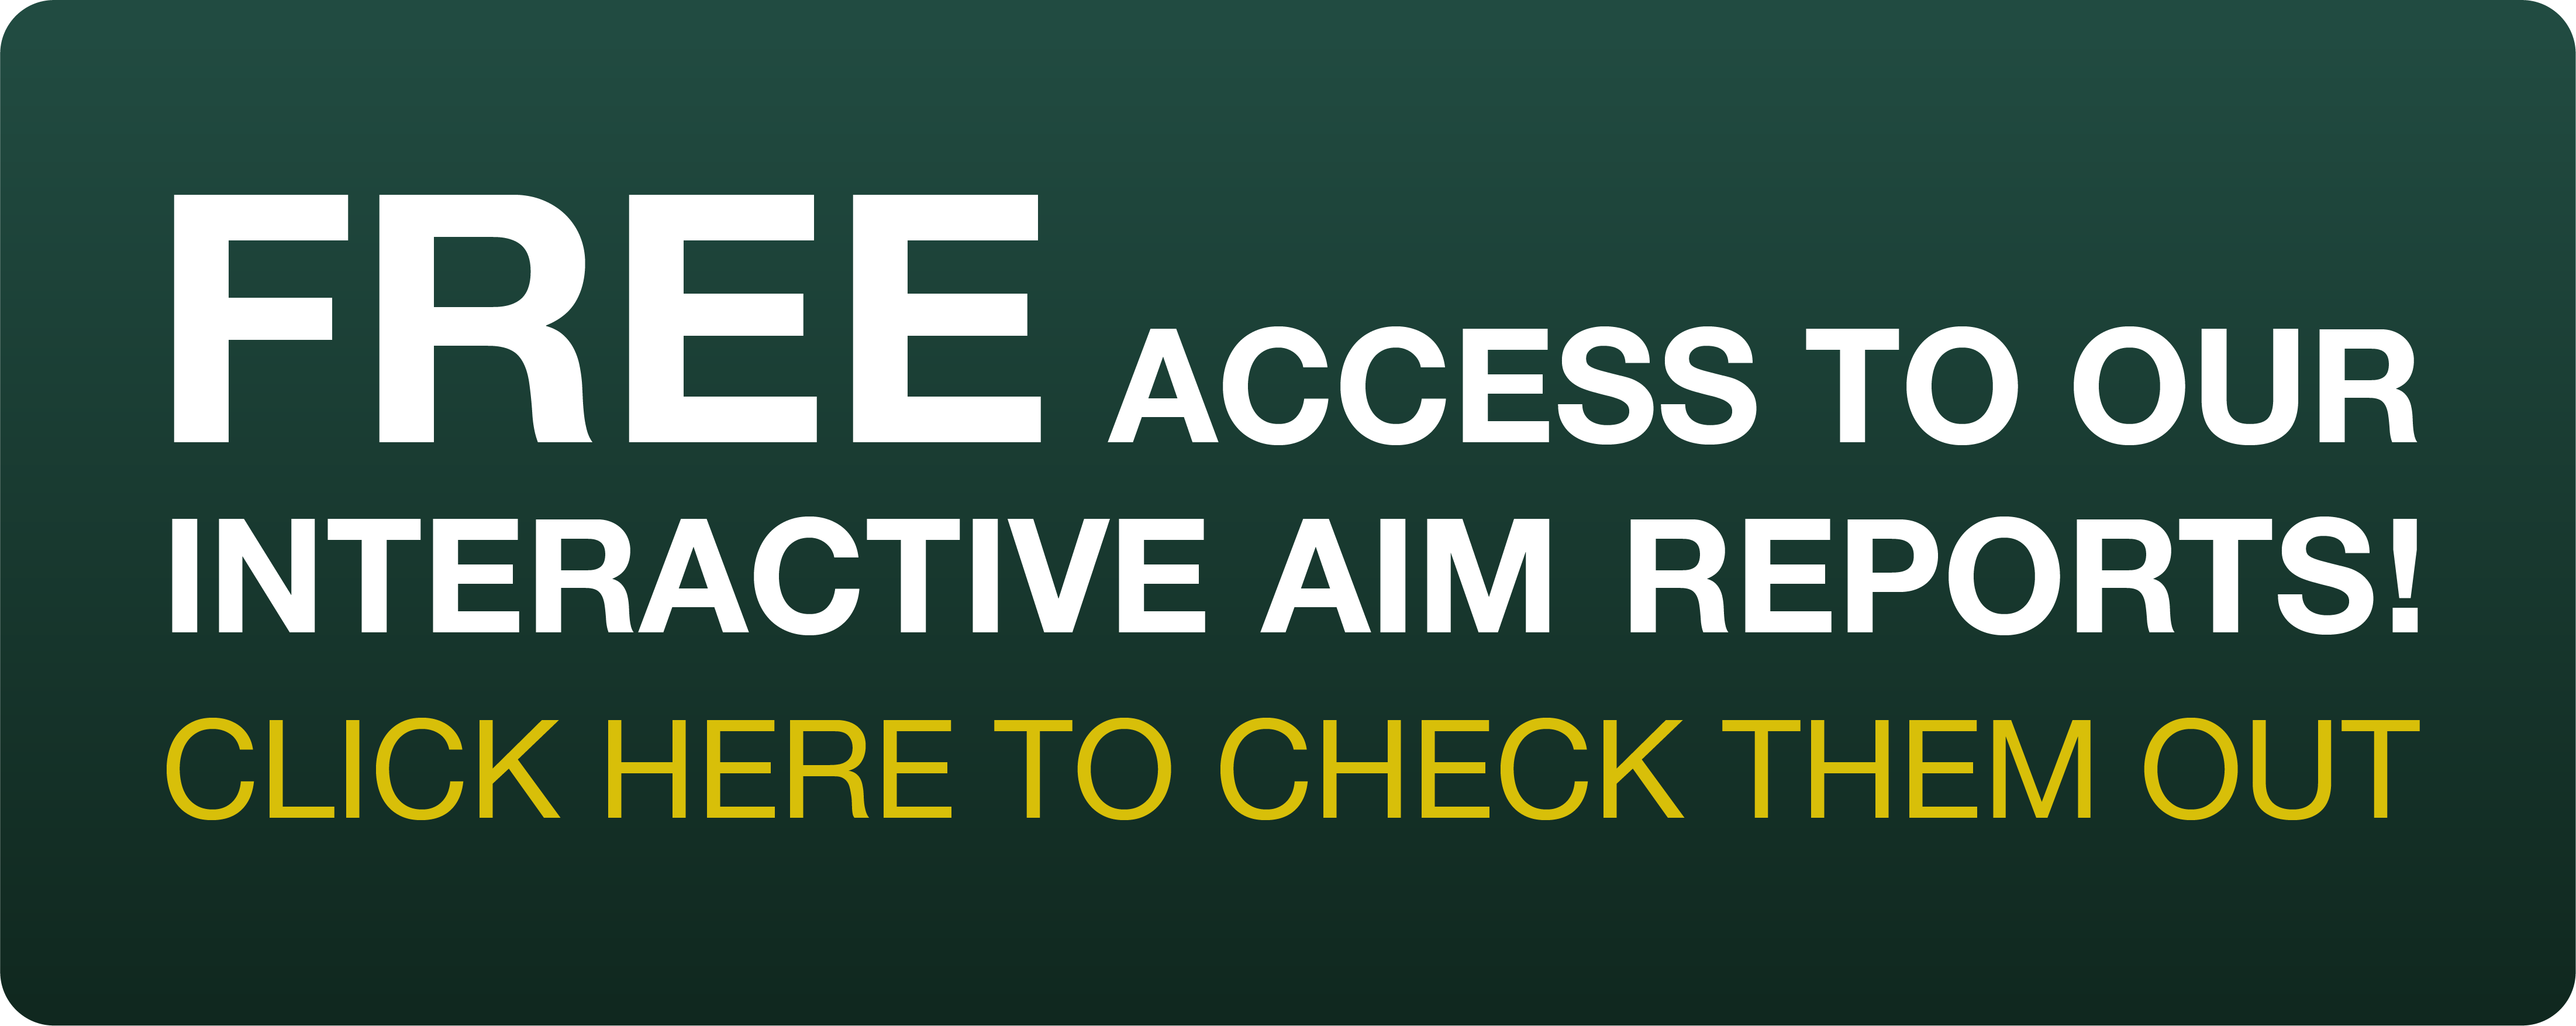 Free Access to AIM Reports